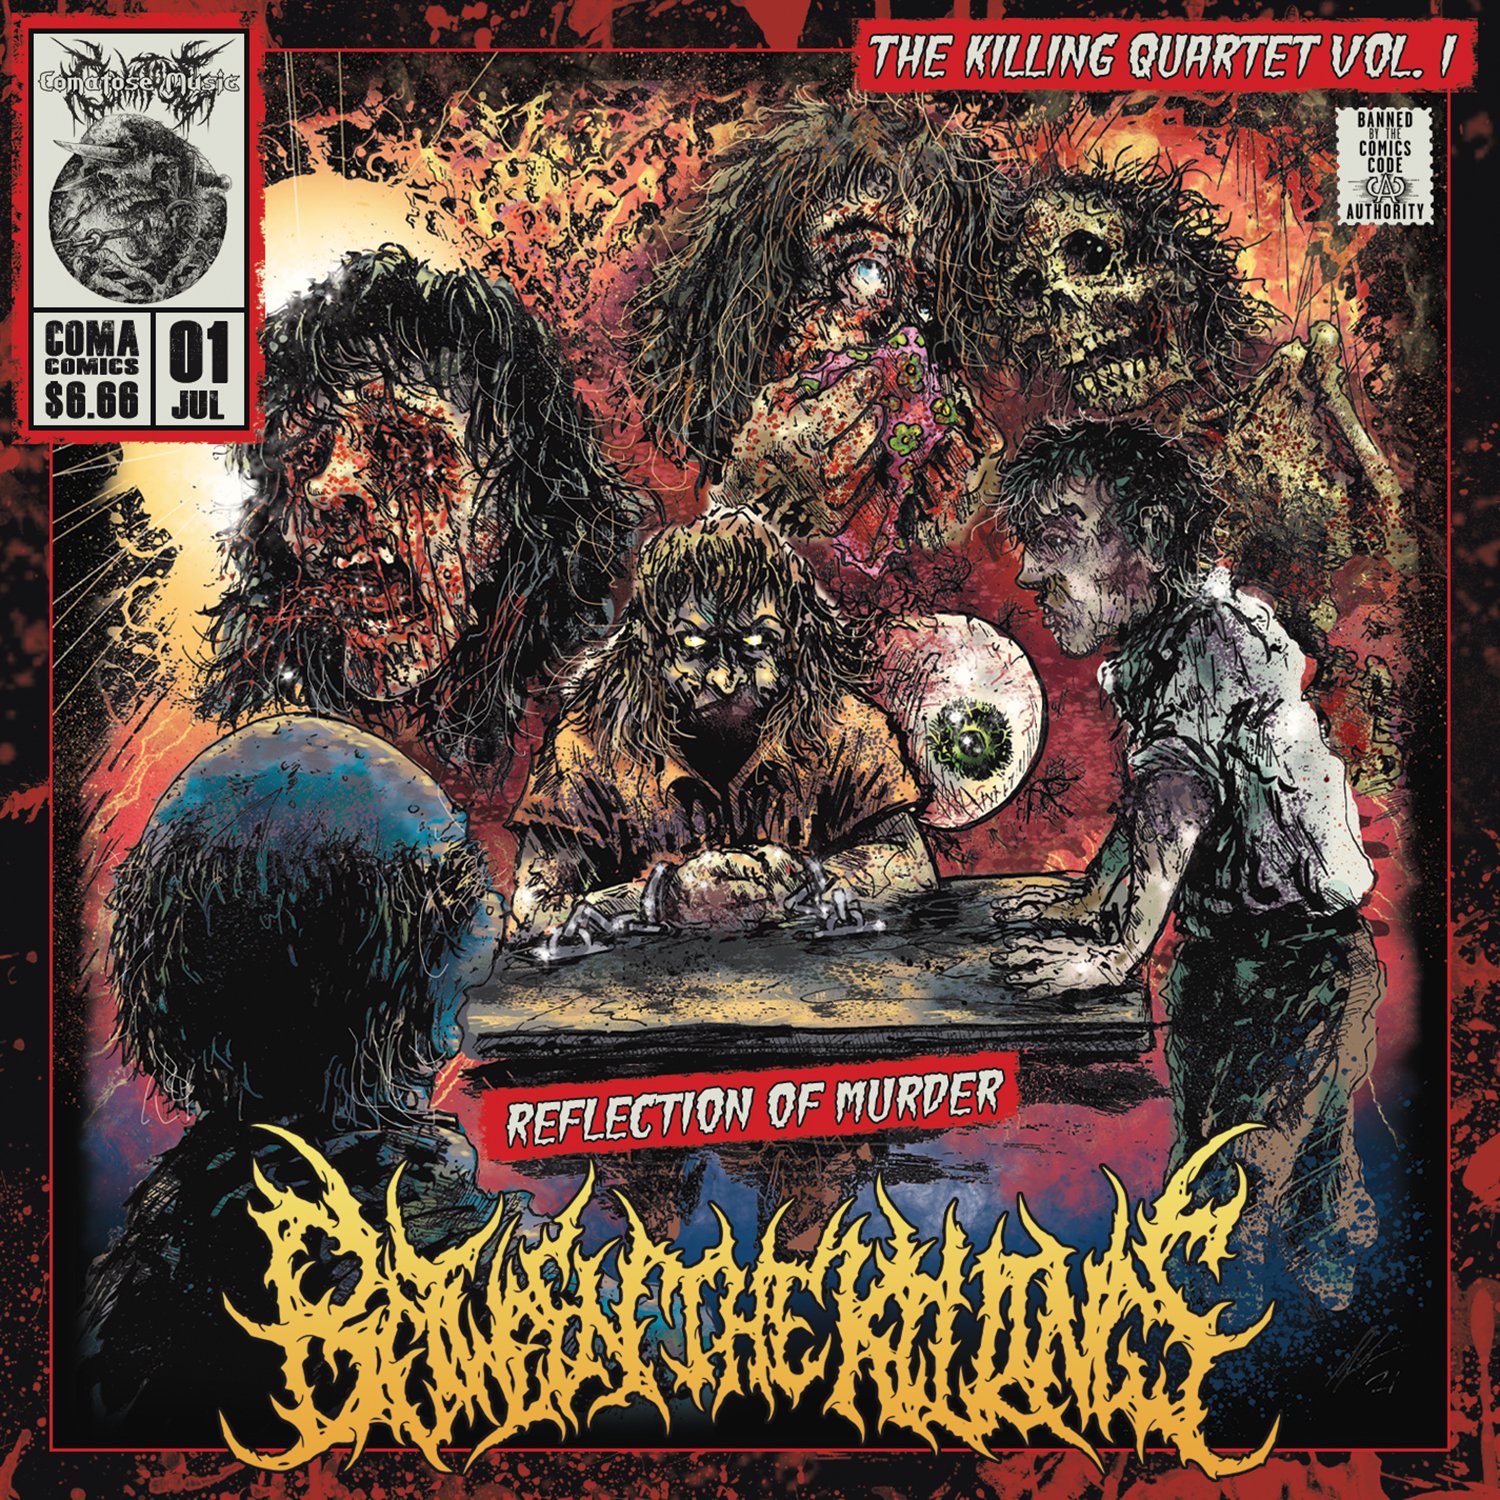 Between the Killings - The Killing Quartet Vol. 1 - Reflection of Murder (2022) FLAC Download